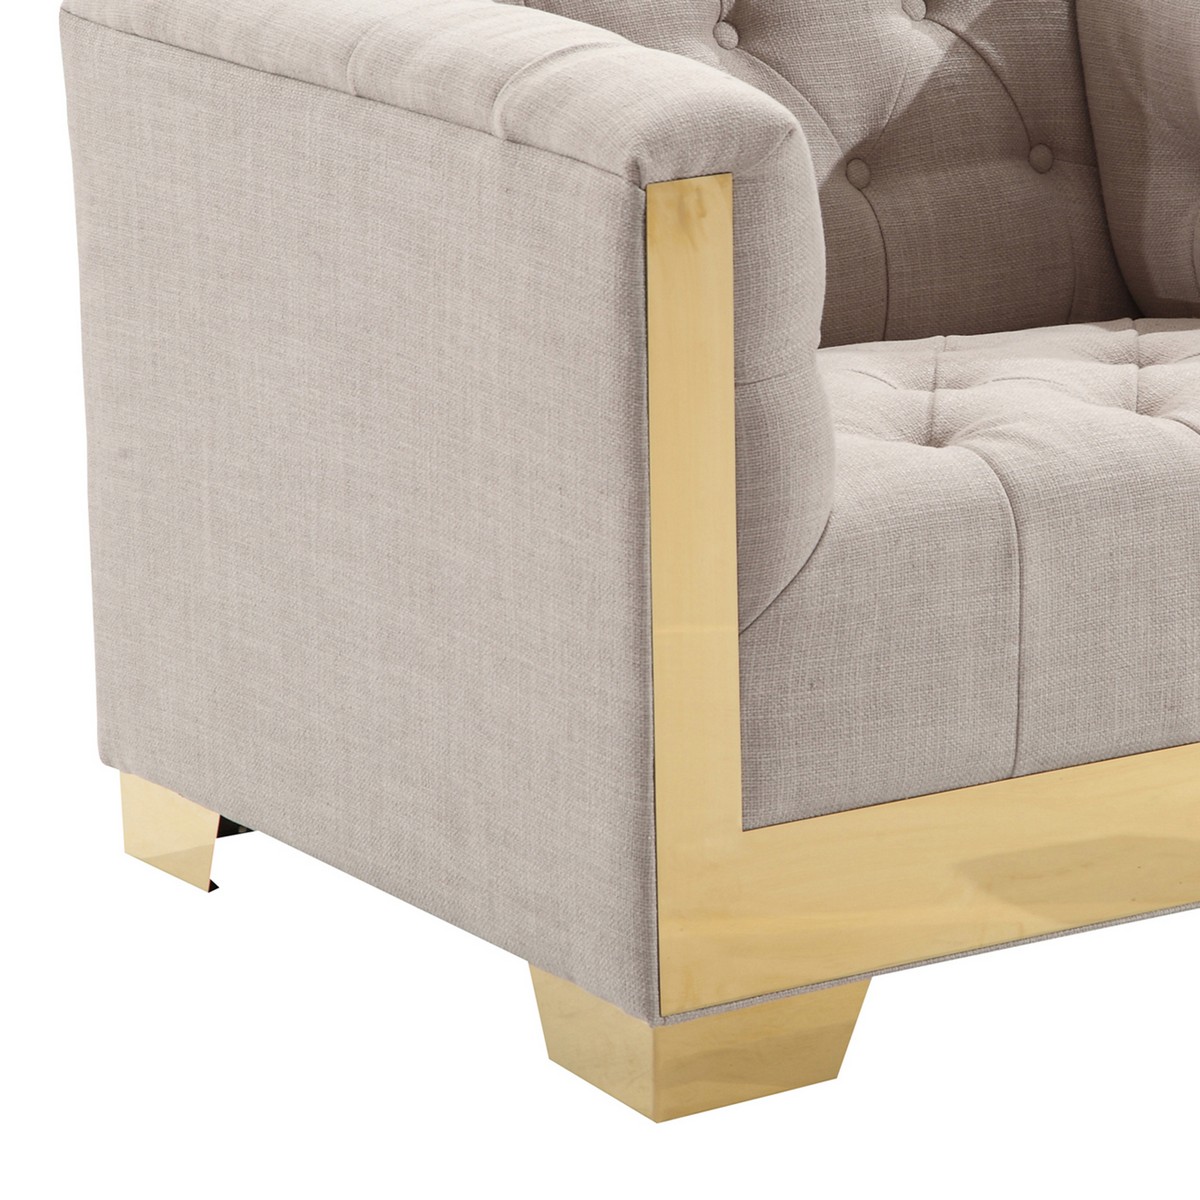 Armen Living Zinc Contemporary Chair In Taupe Tweed and Shiny Gold Finish